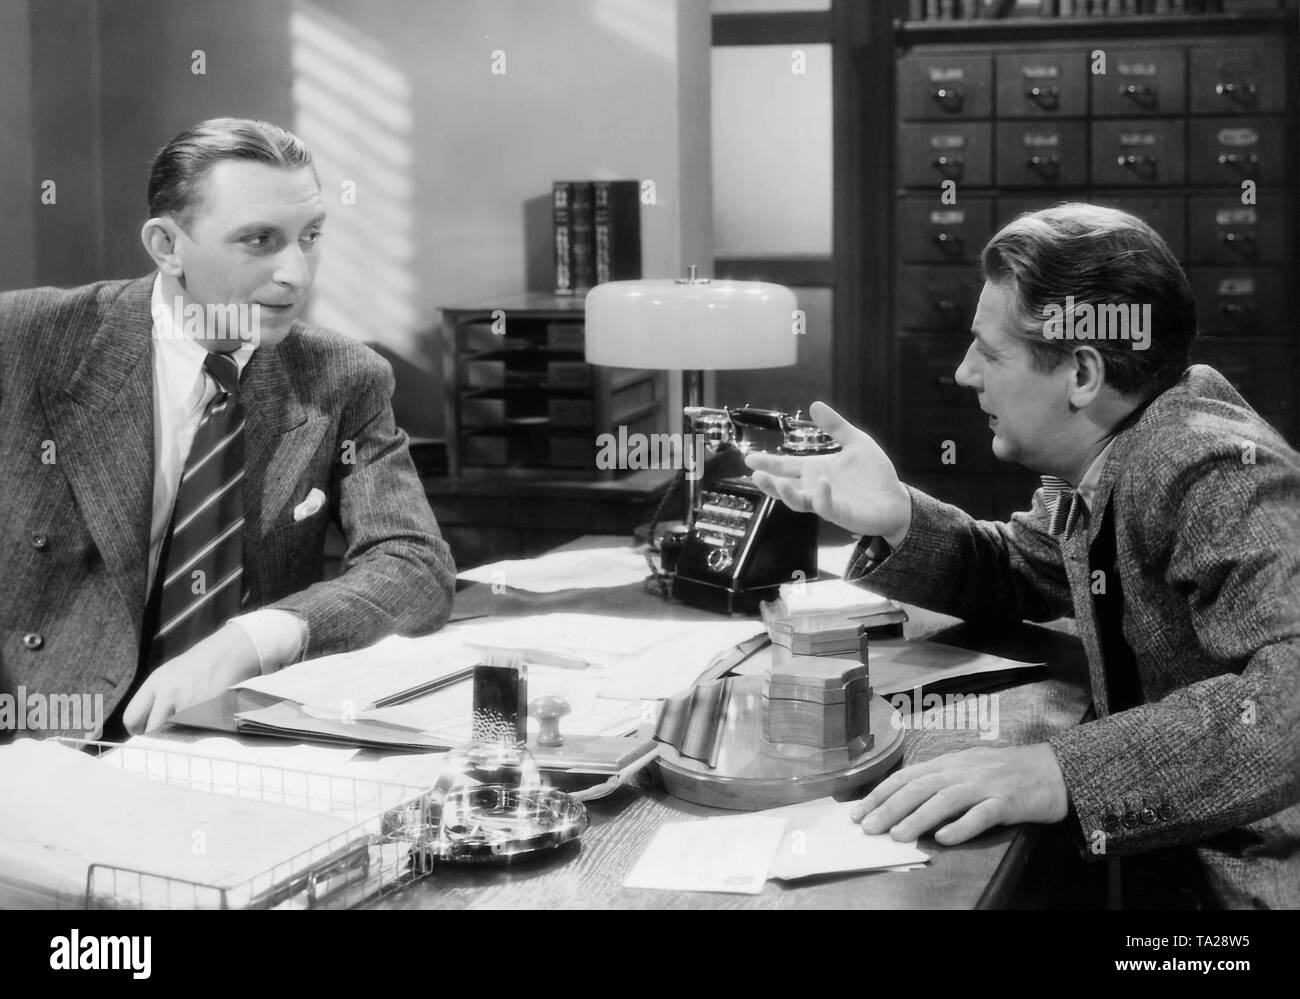 Theo Lingen (left) and Paul Hoerbiger (right) sit face to face at a desk in a scene in 'I Marry my Wife'. Stock Photo